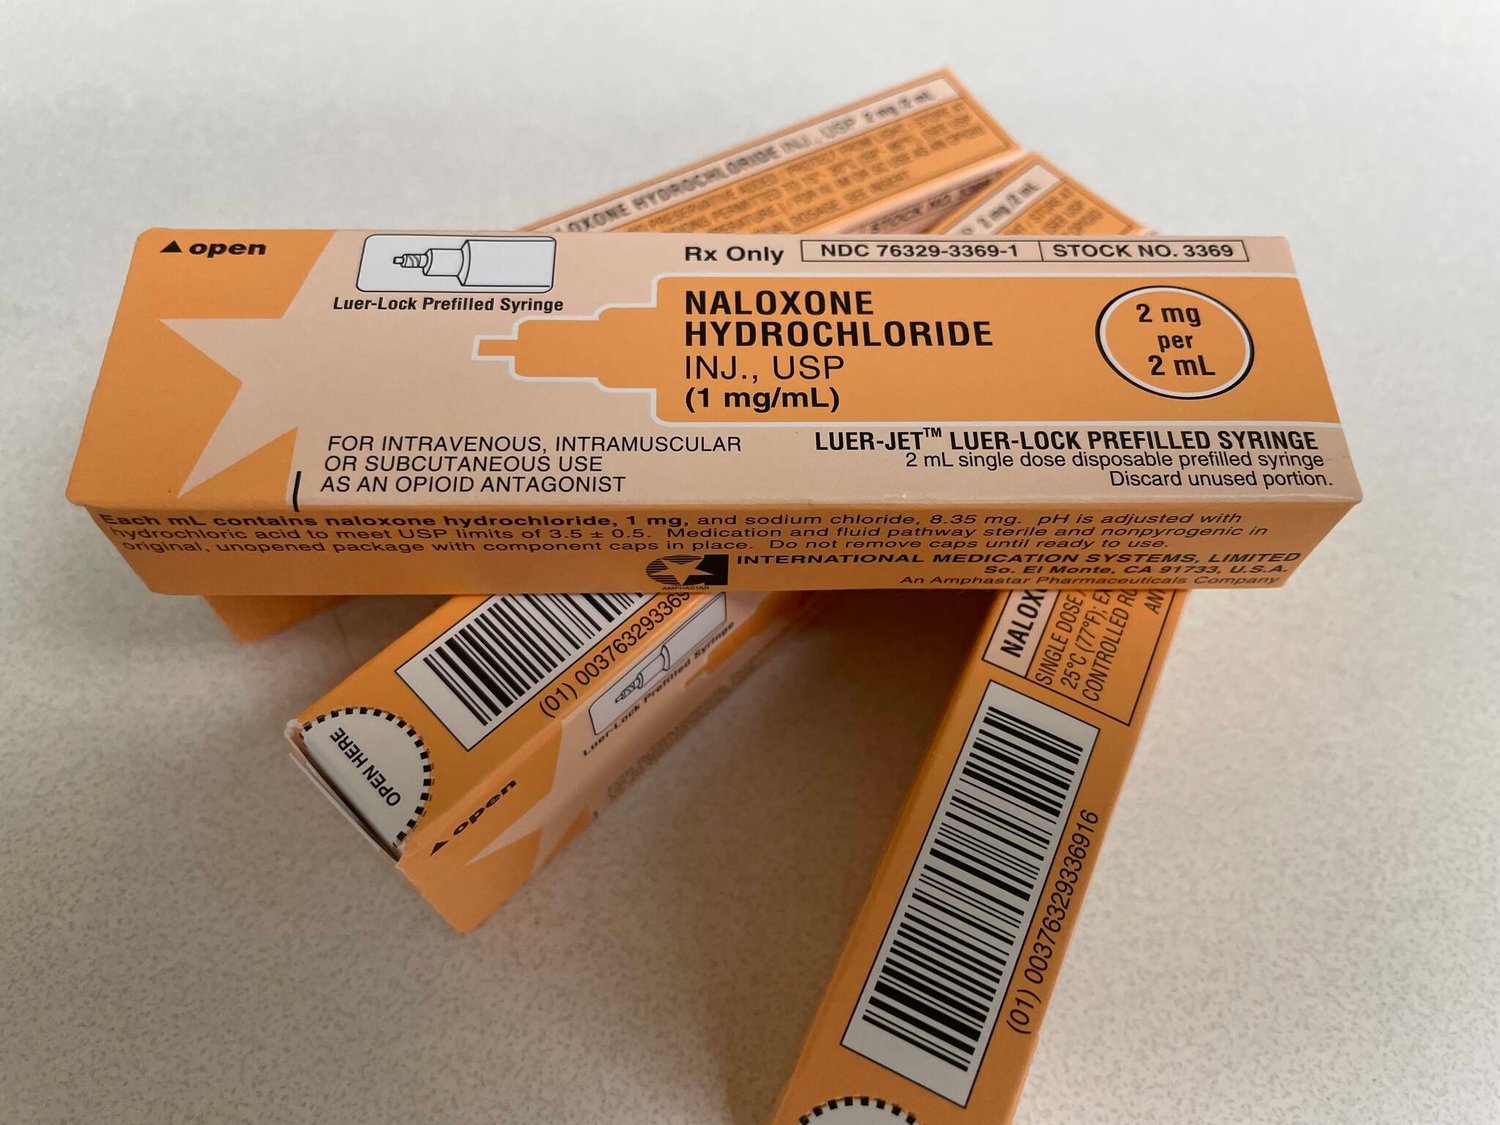 Naloxone, commonly distributed as Narcan, is an opioid antagonist, one of the most effective tools from saving someone from dying of a fatal opioid overdose.